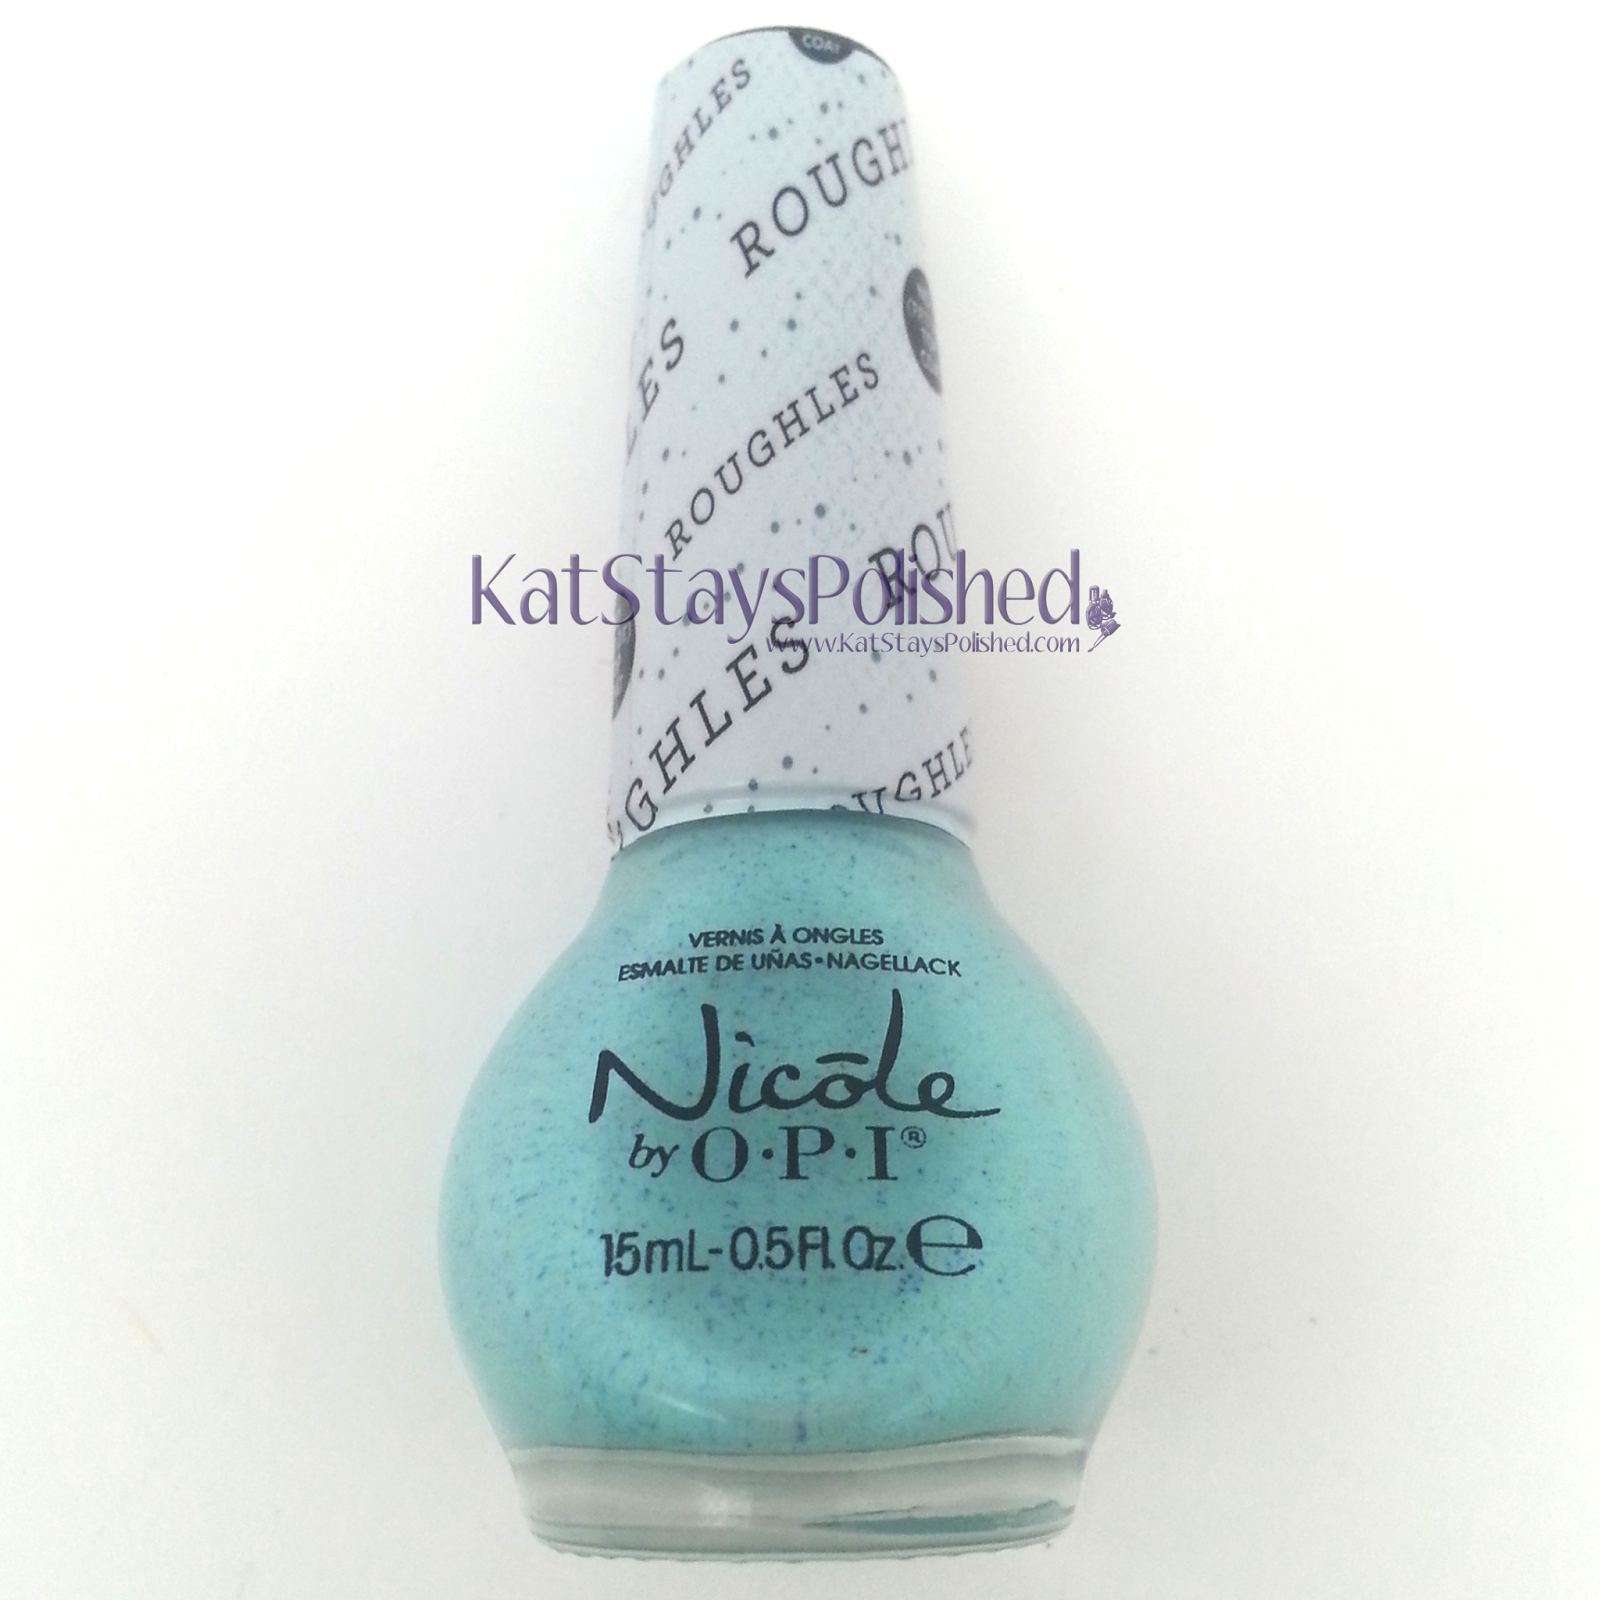 Ipsy Glam Bag: March 2014 - Nicole by OPI Roughles - On What Grounds | Kat Stays Polished